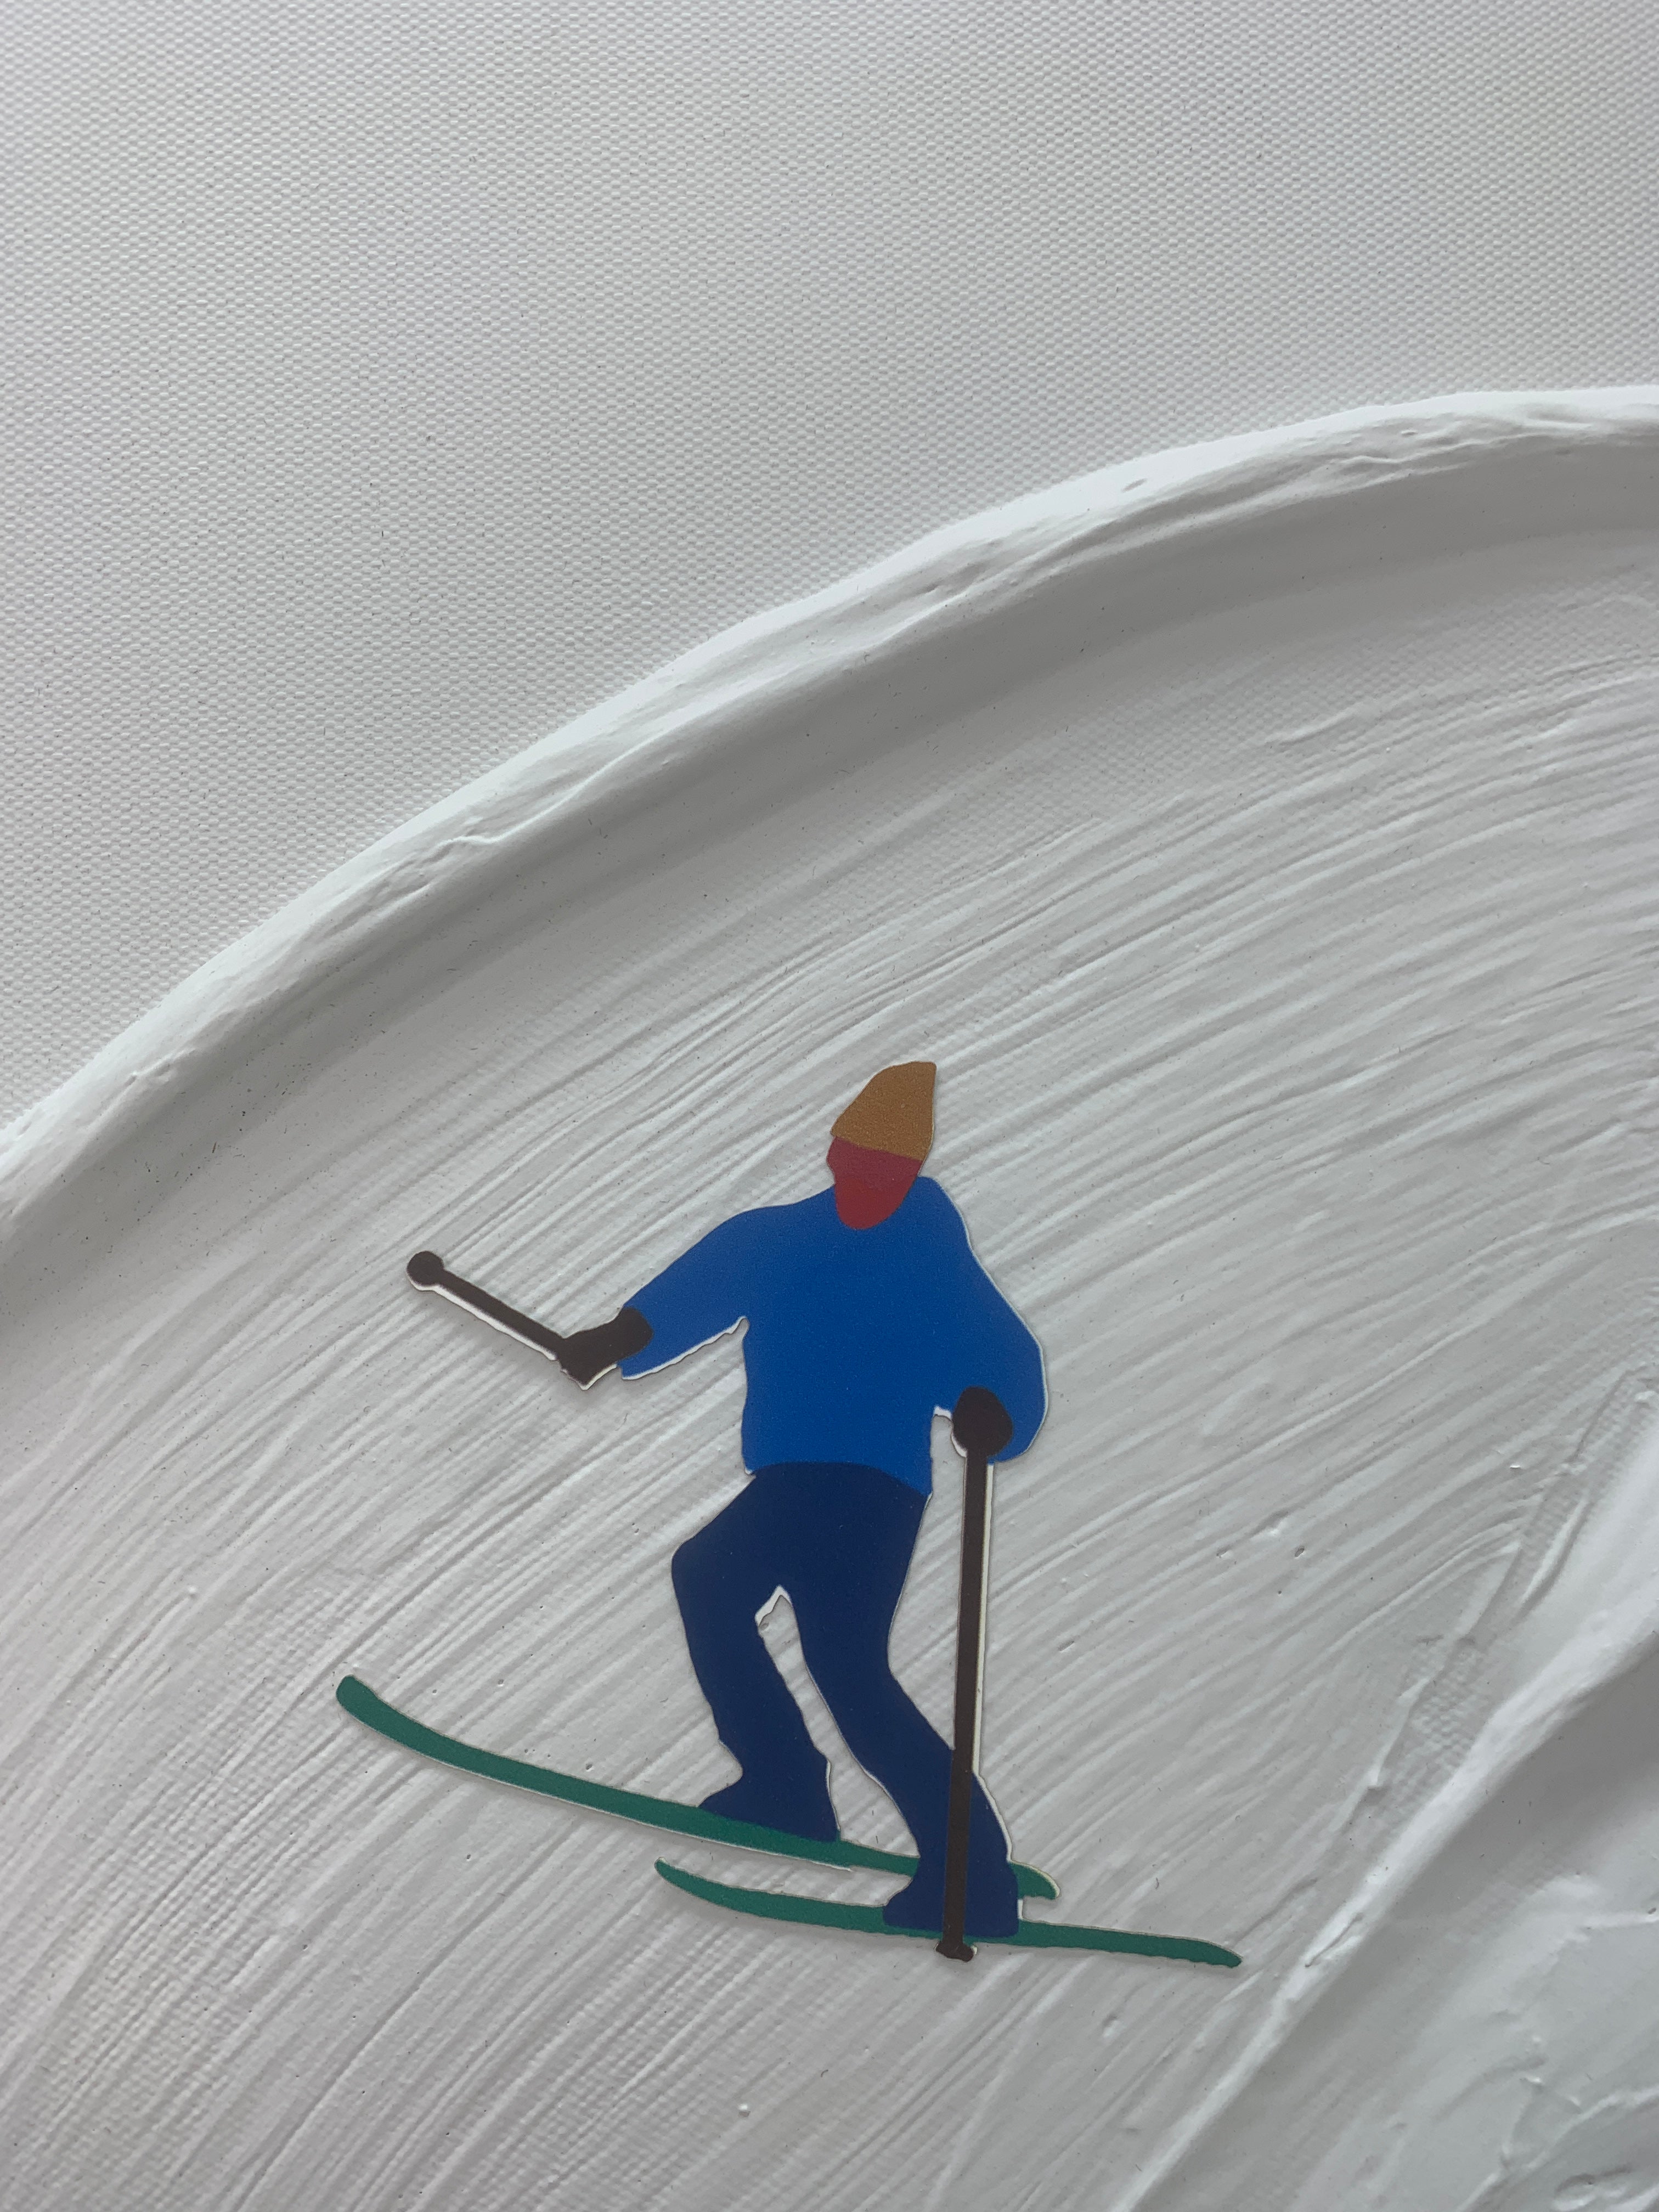 Snowy Strokes: Oil Painting on Canvas with Ski Slope and Brush Detail Wall Art Interior Moderna   